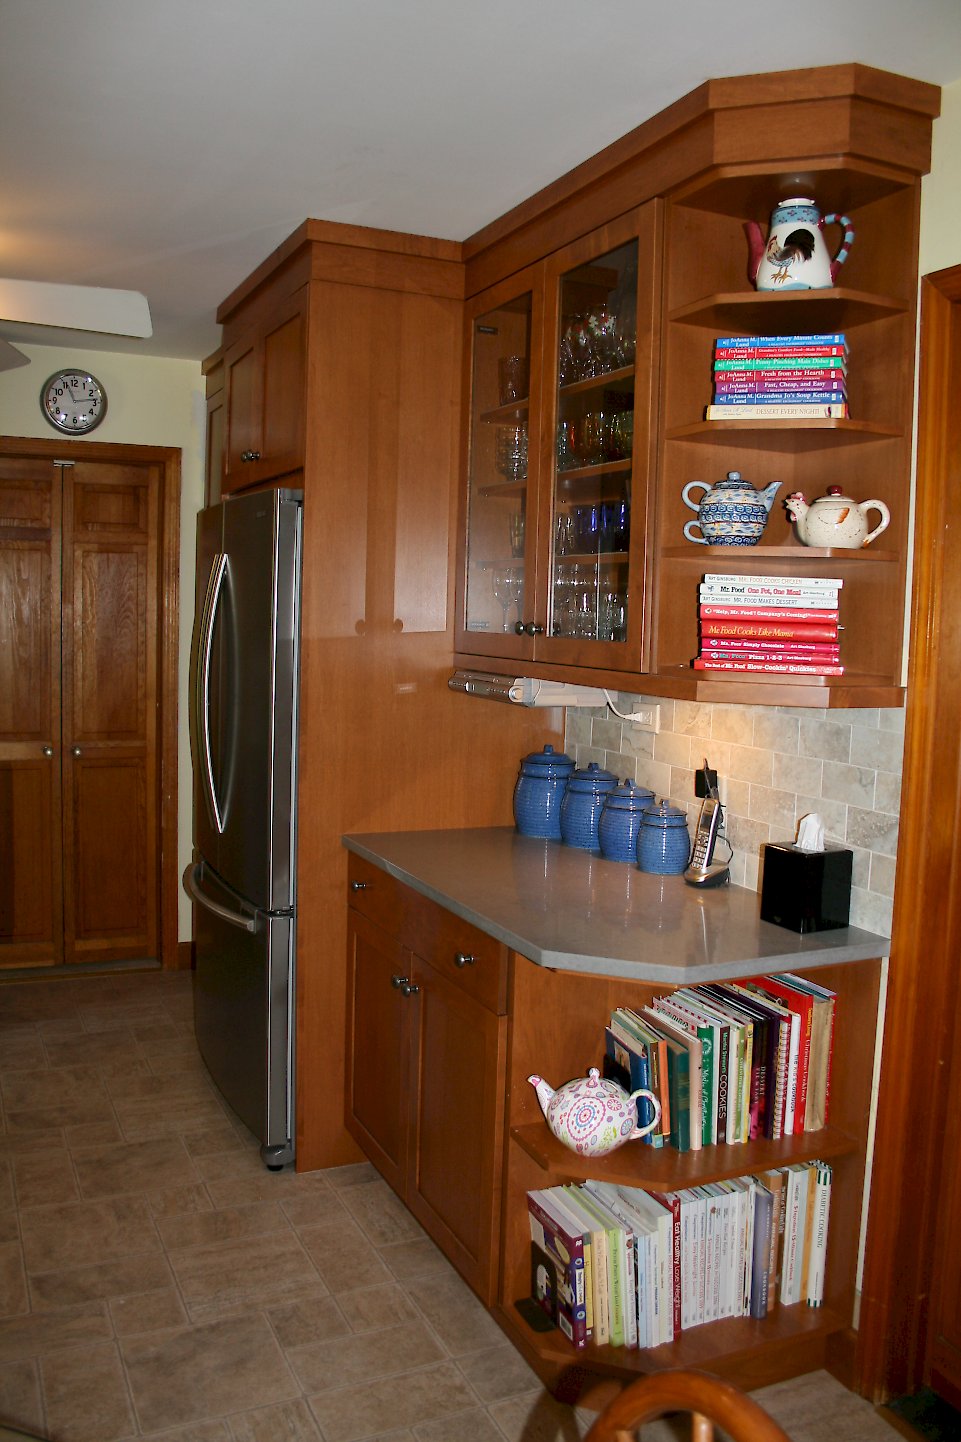 Open shelving at the end of the cabinetry.